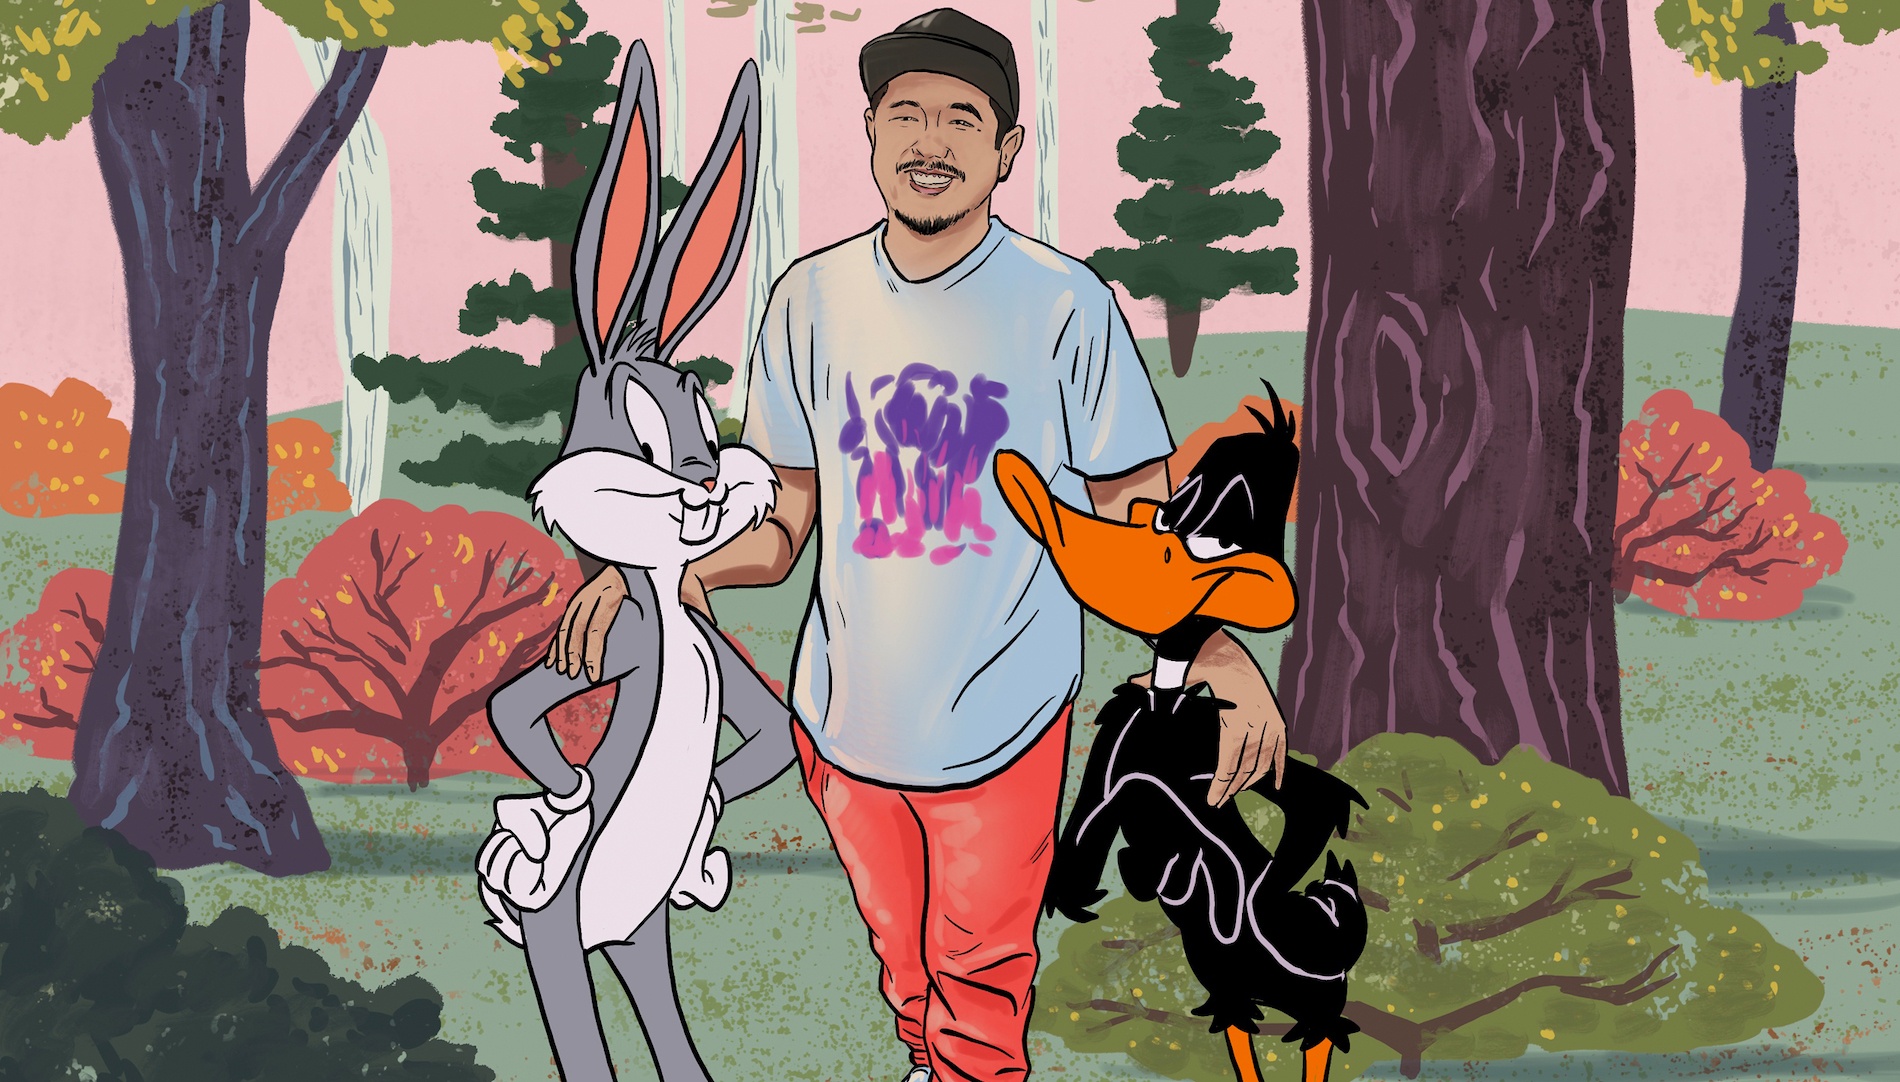 Daffy Duck  Daffy duck, Looney tunes show, Looney tunes characters